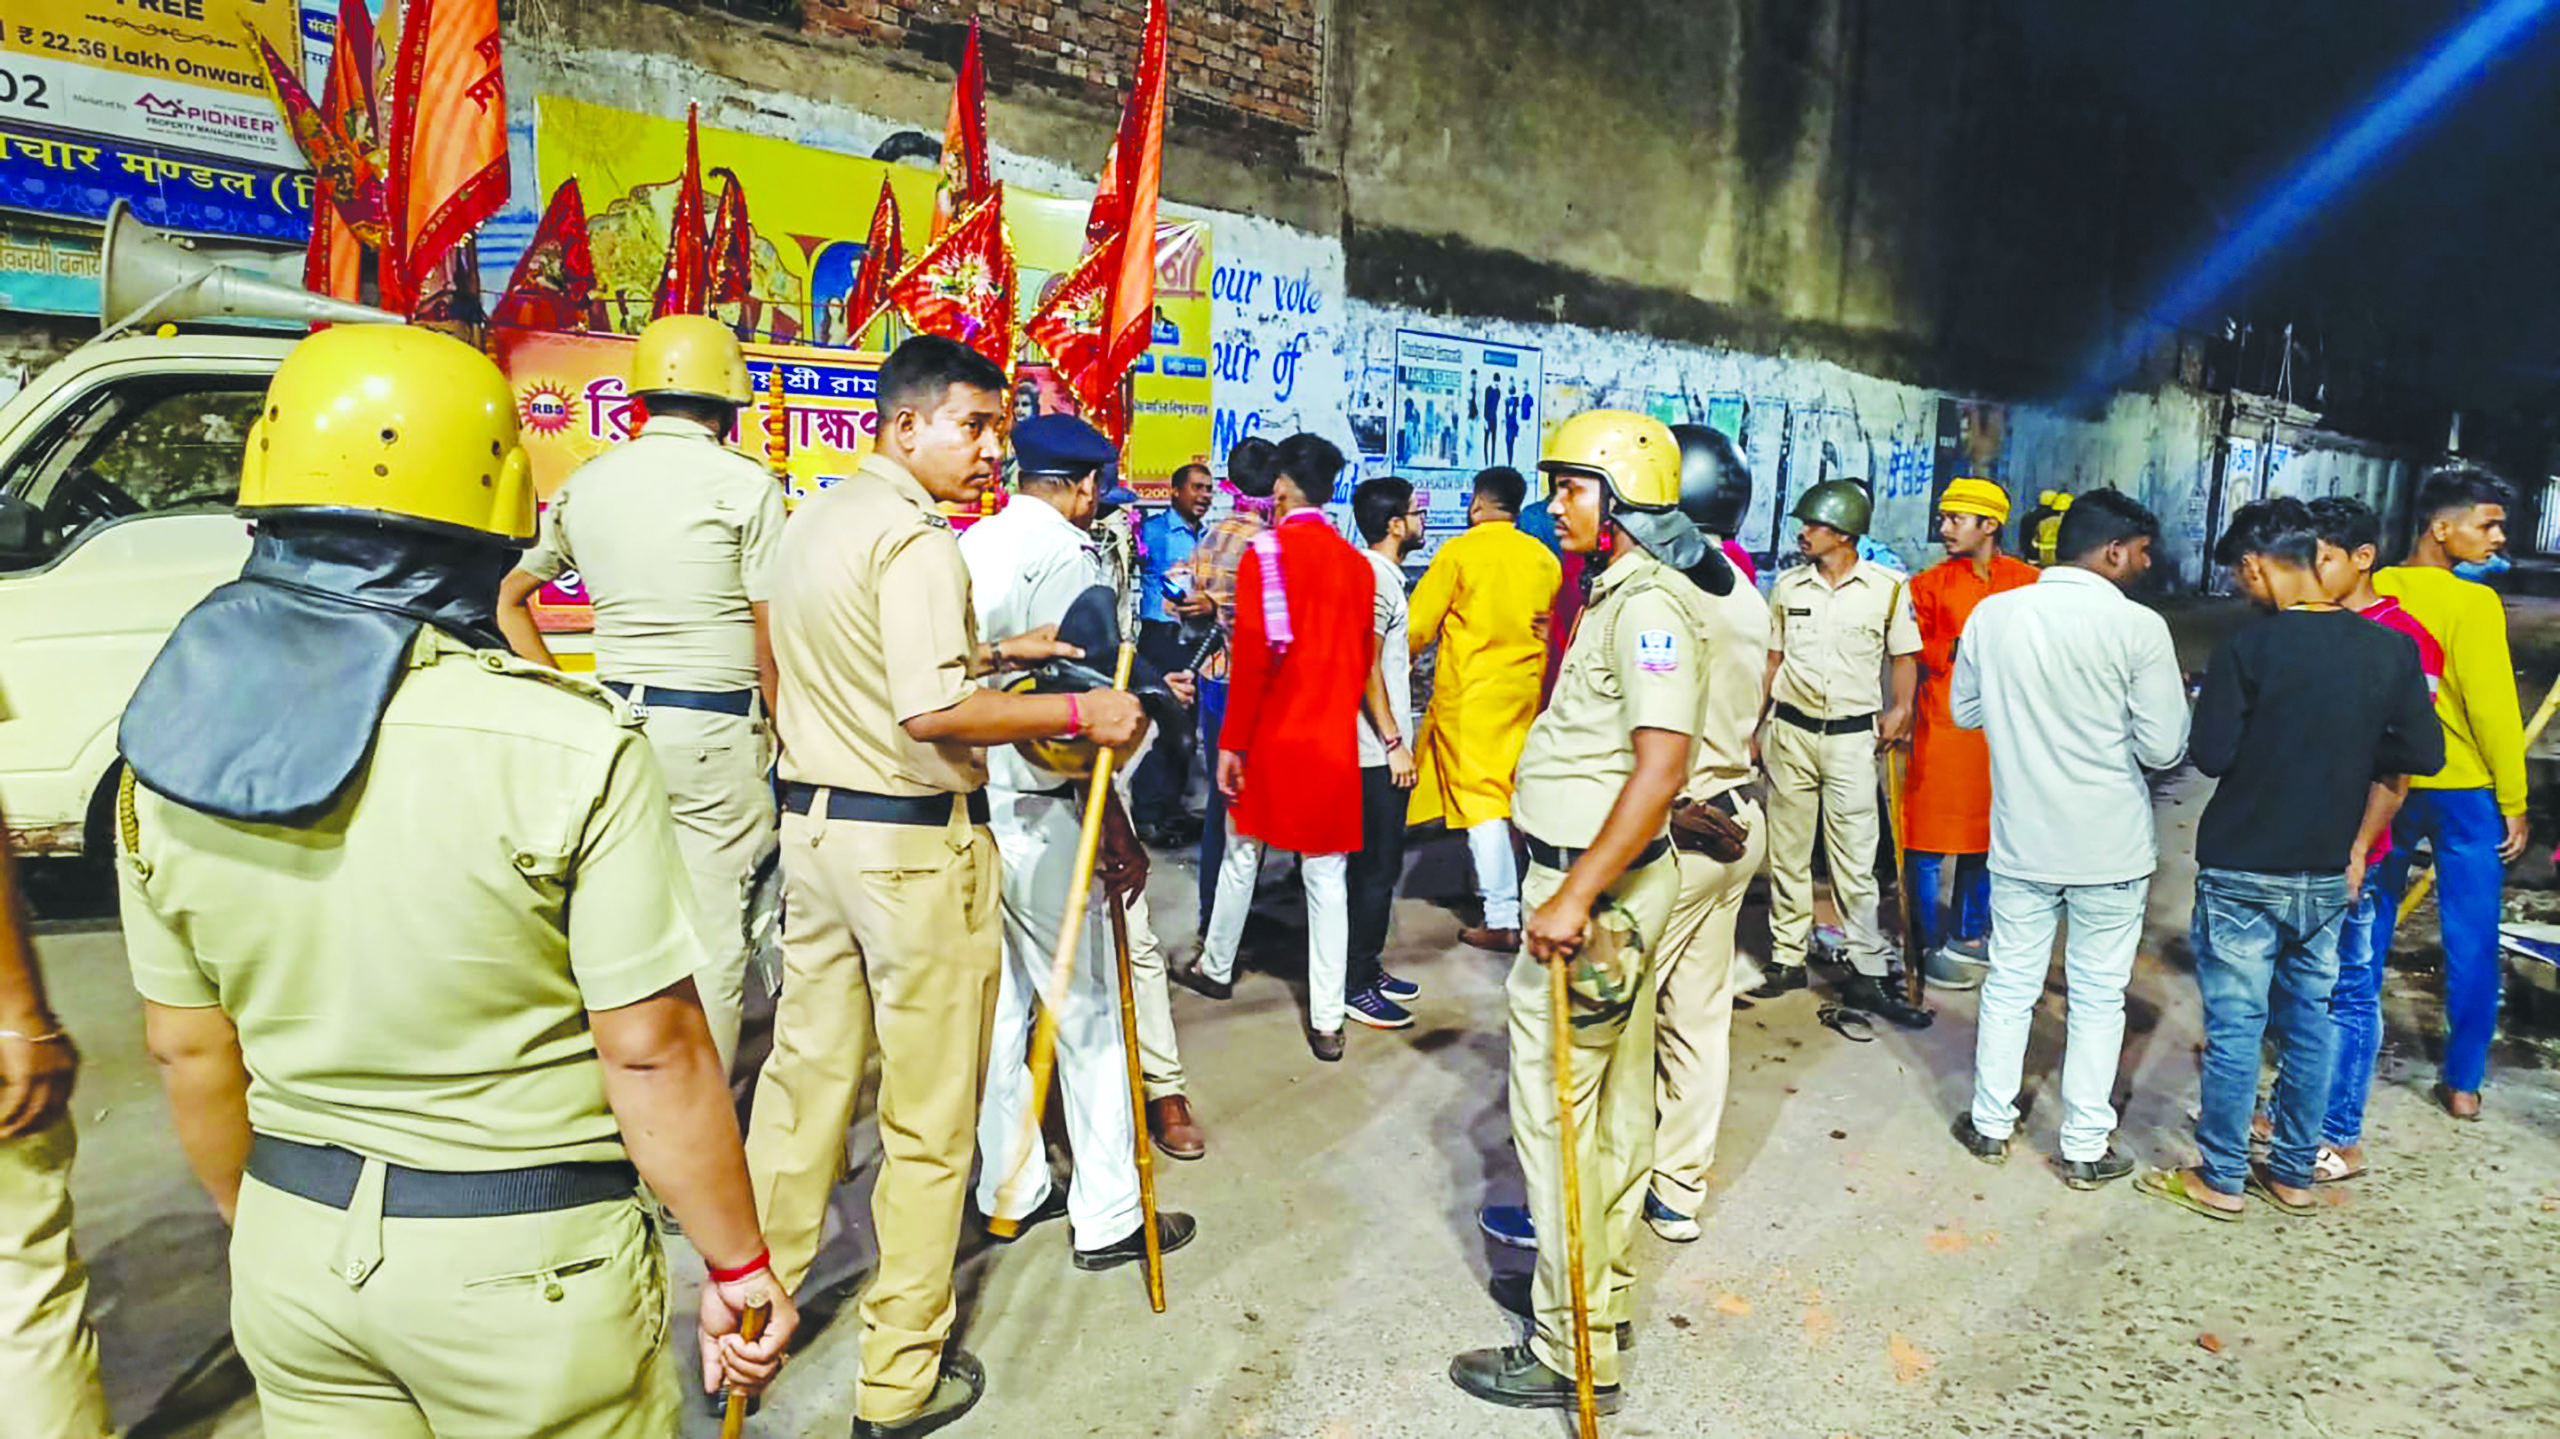 West Bengal: Clashes In Hooghly's Rishra During Ram Navami